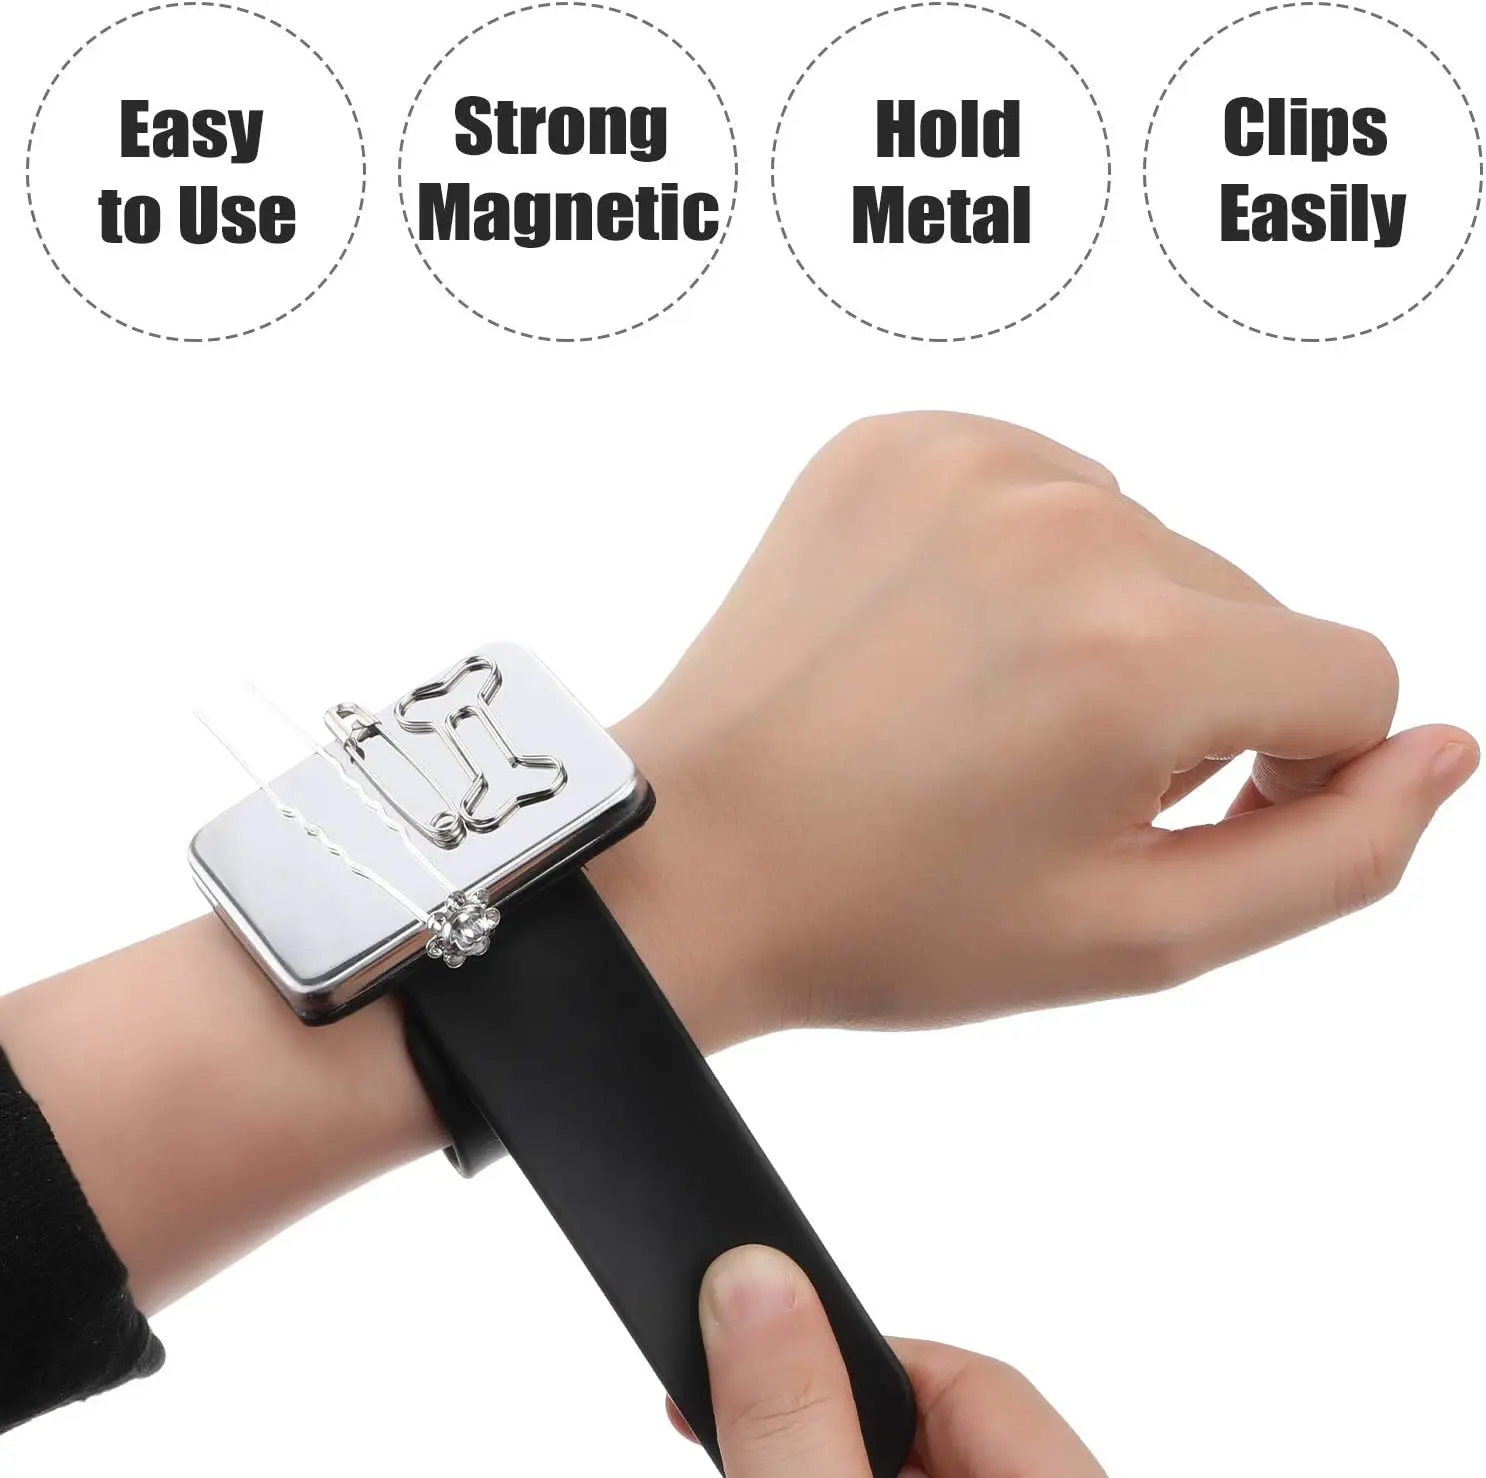 Professional Magnetic Bracelet Wrist Band Strap Salon Hair Accessories Hair Clip Holder Barber Hairdressing Styling Tools for xiaomi mi band 3 4 colorful stone decorated watch strap two rows beads wrist strap smart watch band replacement colorful